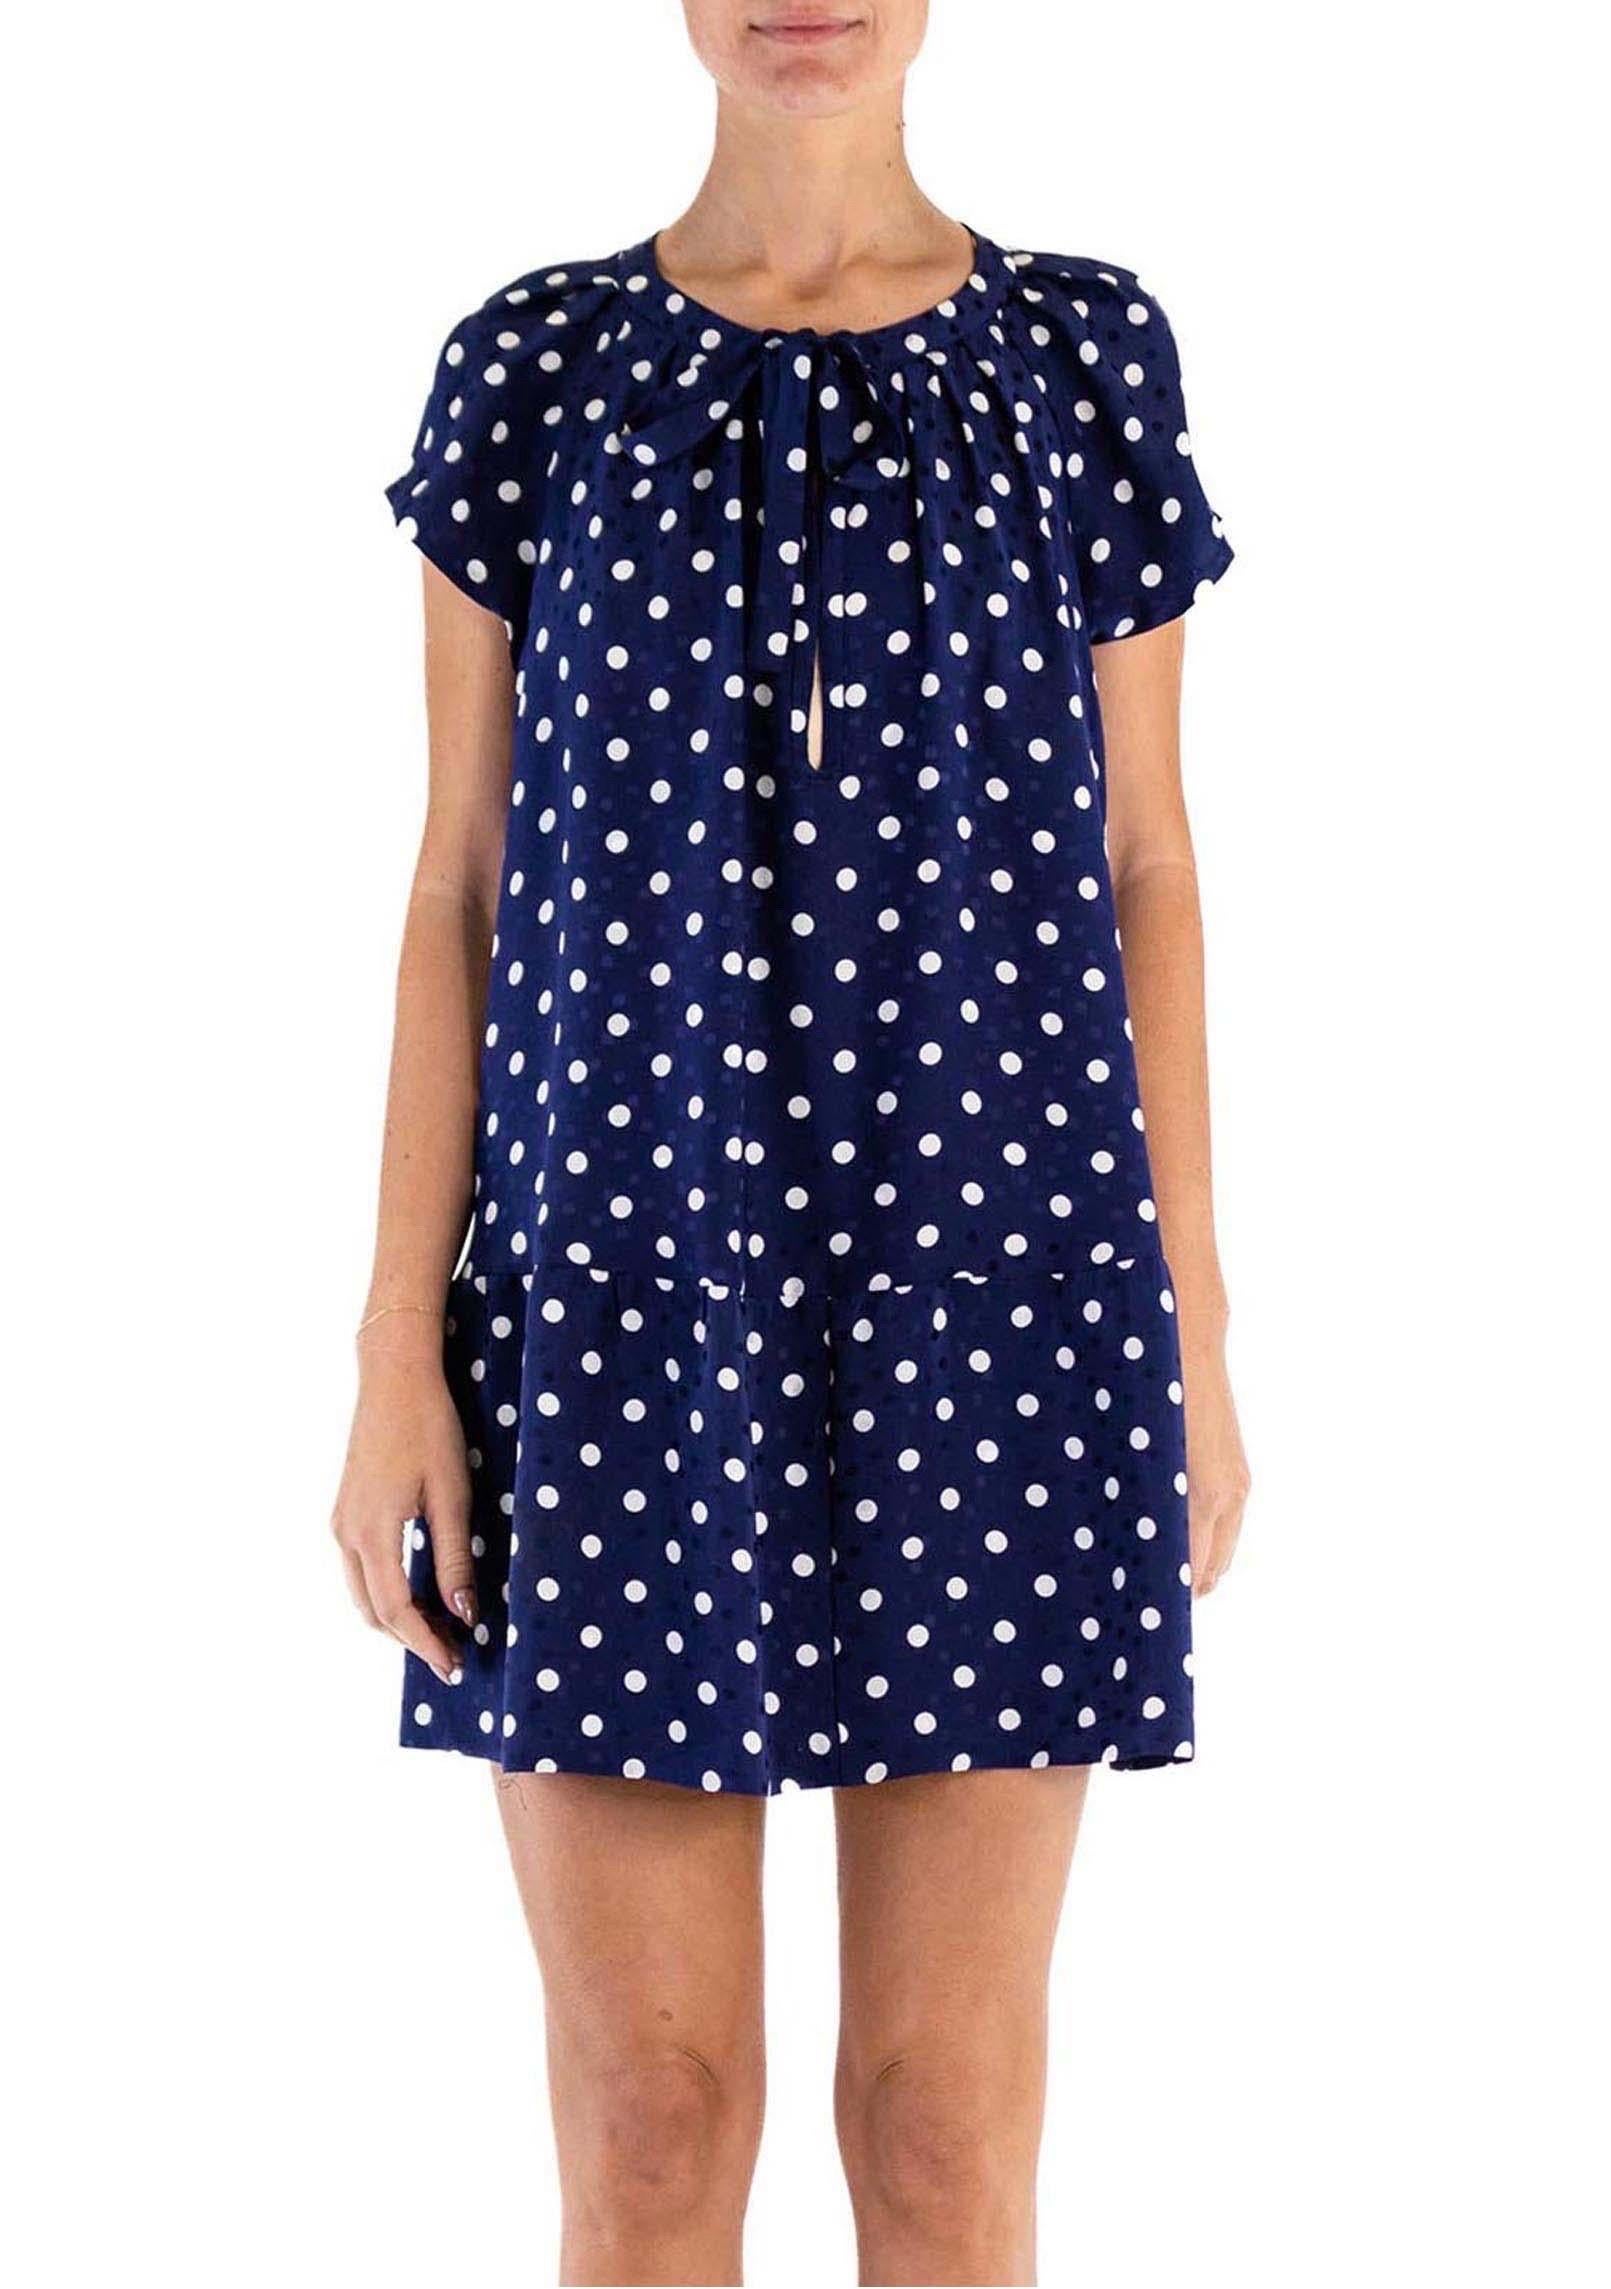 1980S YVES SAINT LAURENT Navy Blue Polka Dot Silk Jacquard Baby Doll Dress In Excellent Condition For Sale In New York, NY